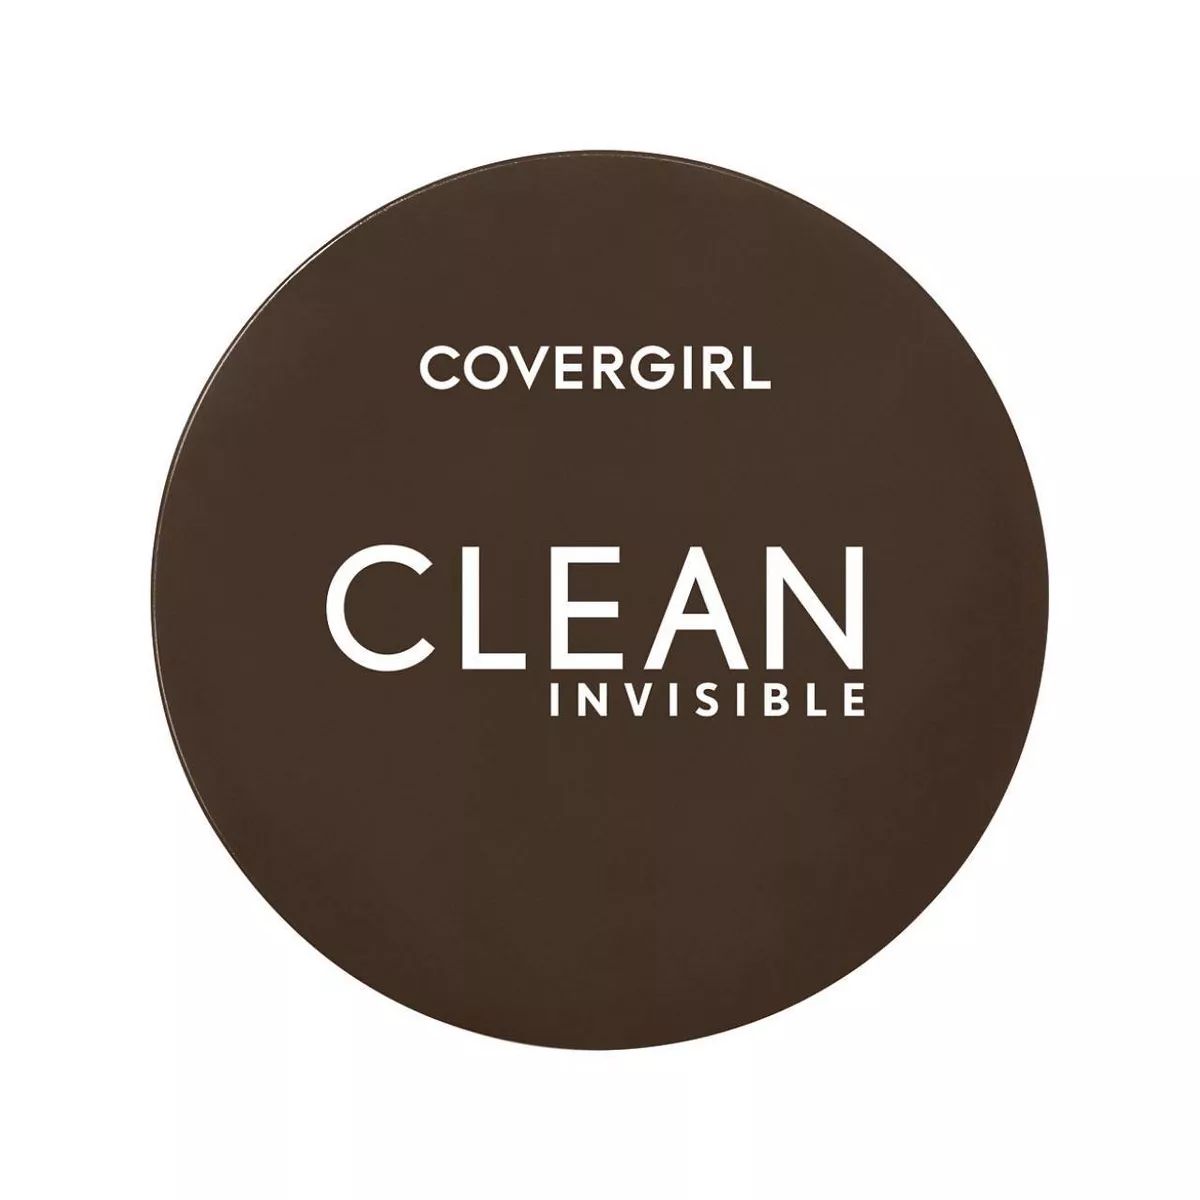 COVERGIRL Clean Invisible Pressed Powder Foundation - 0.38oz | Target